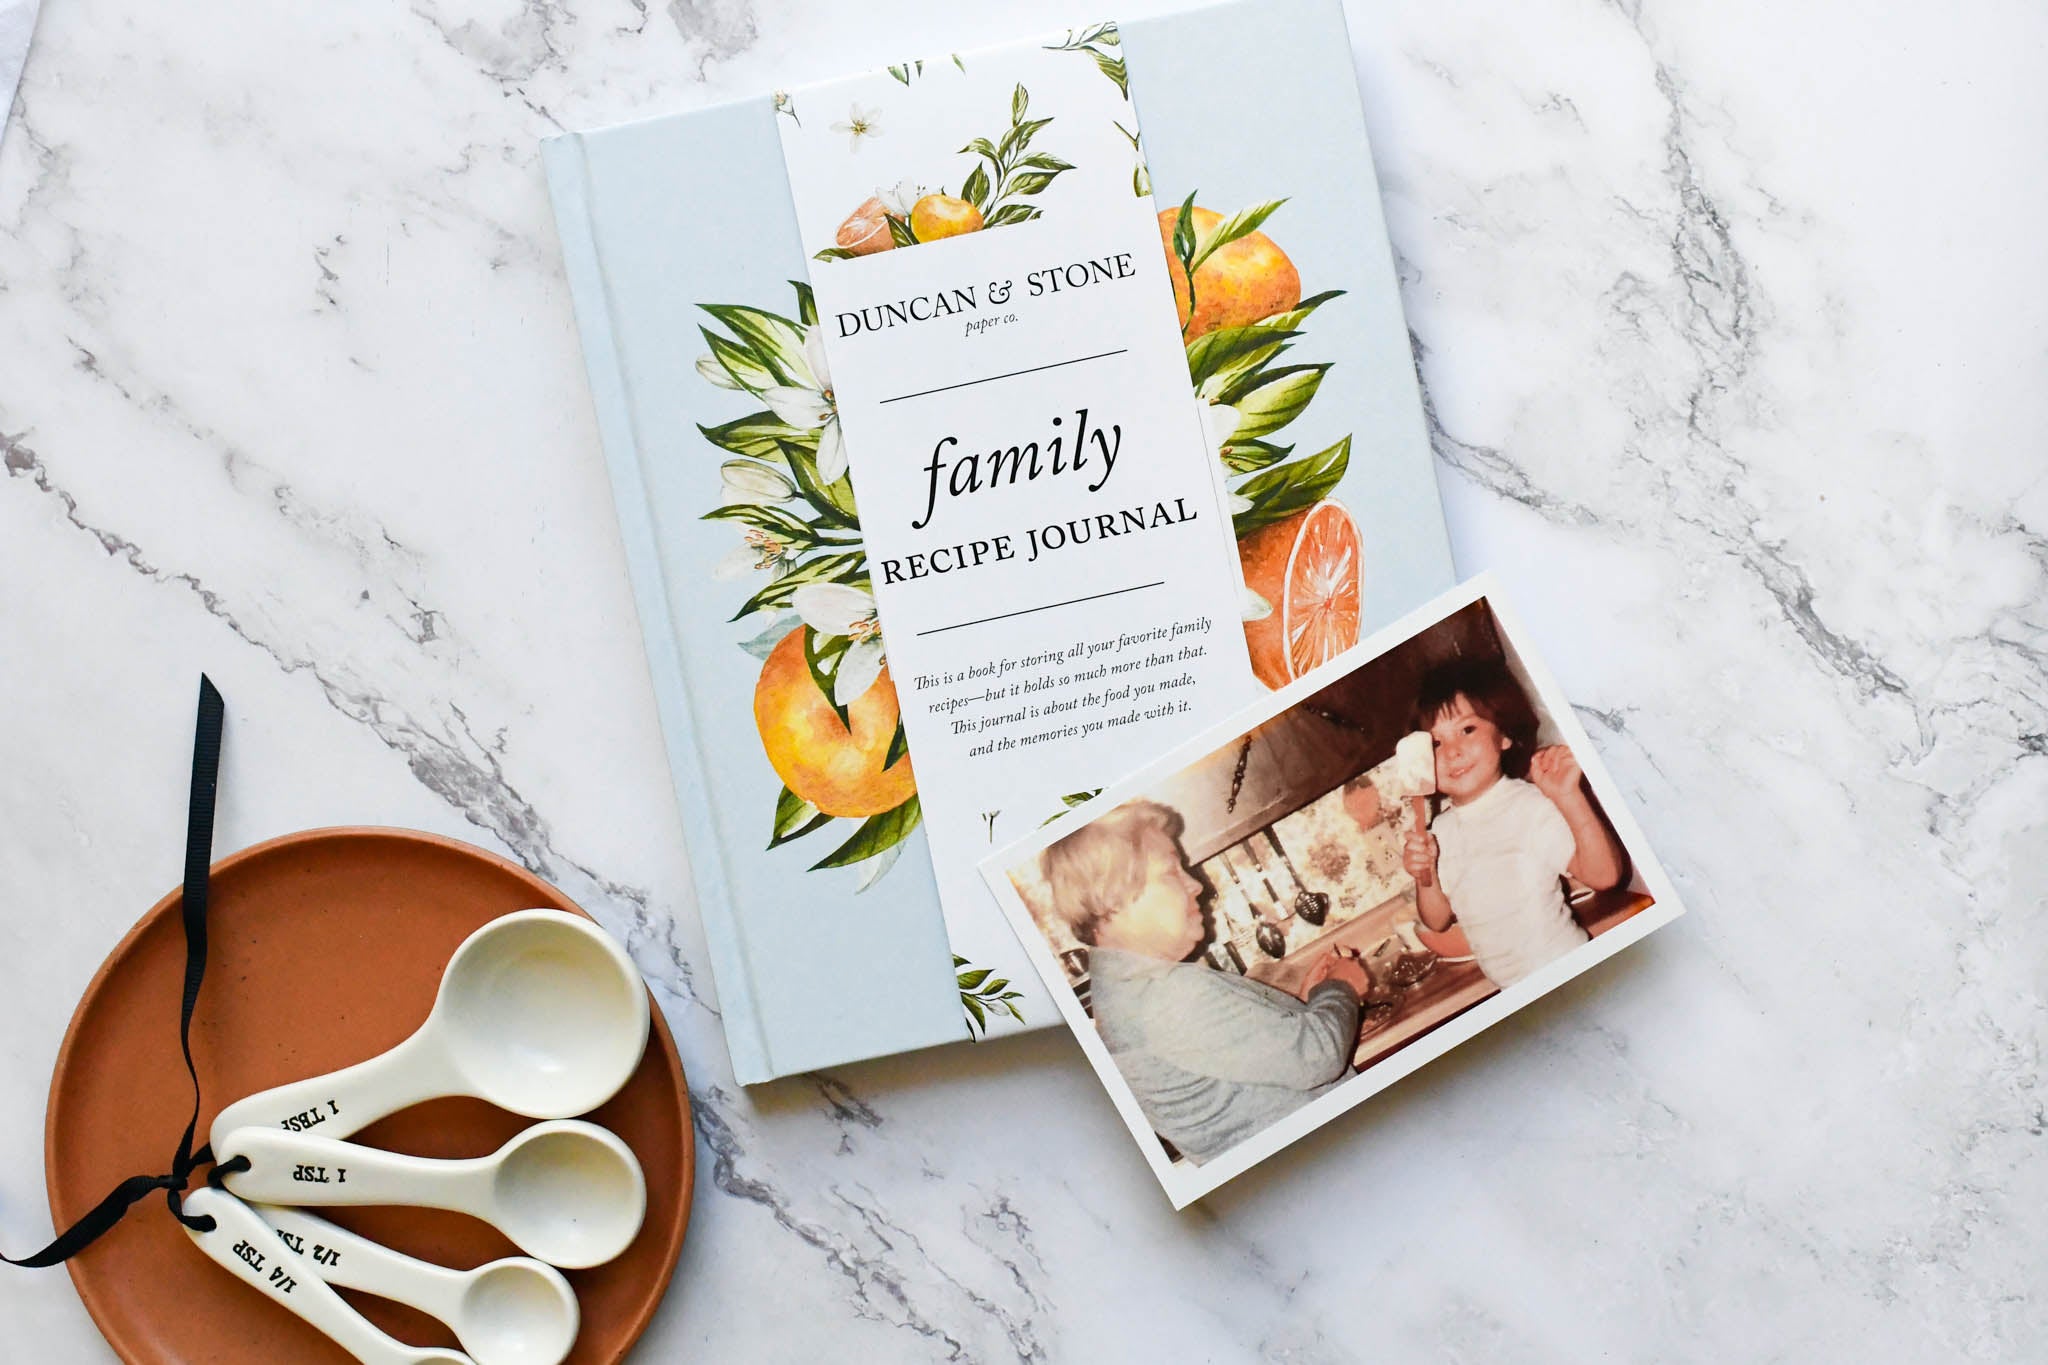 Illustrated Family Recipe Book Gift Idea - For the Love of Food